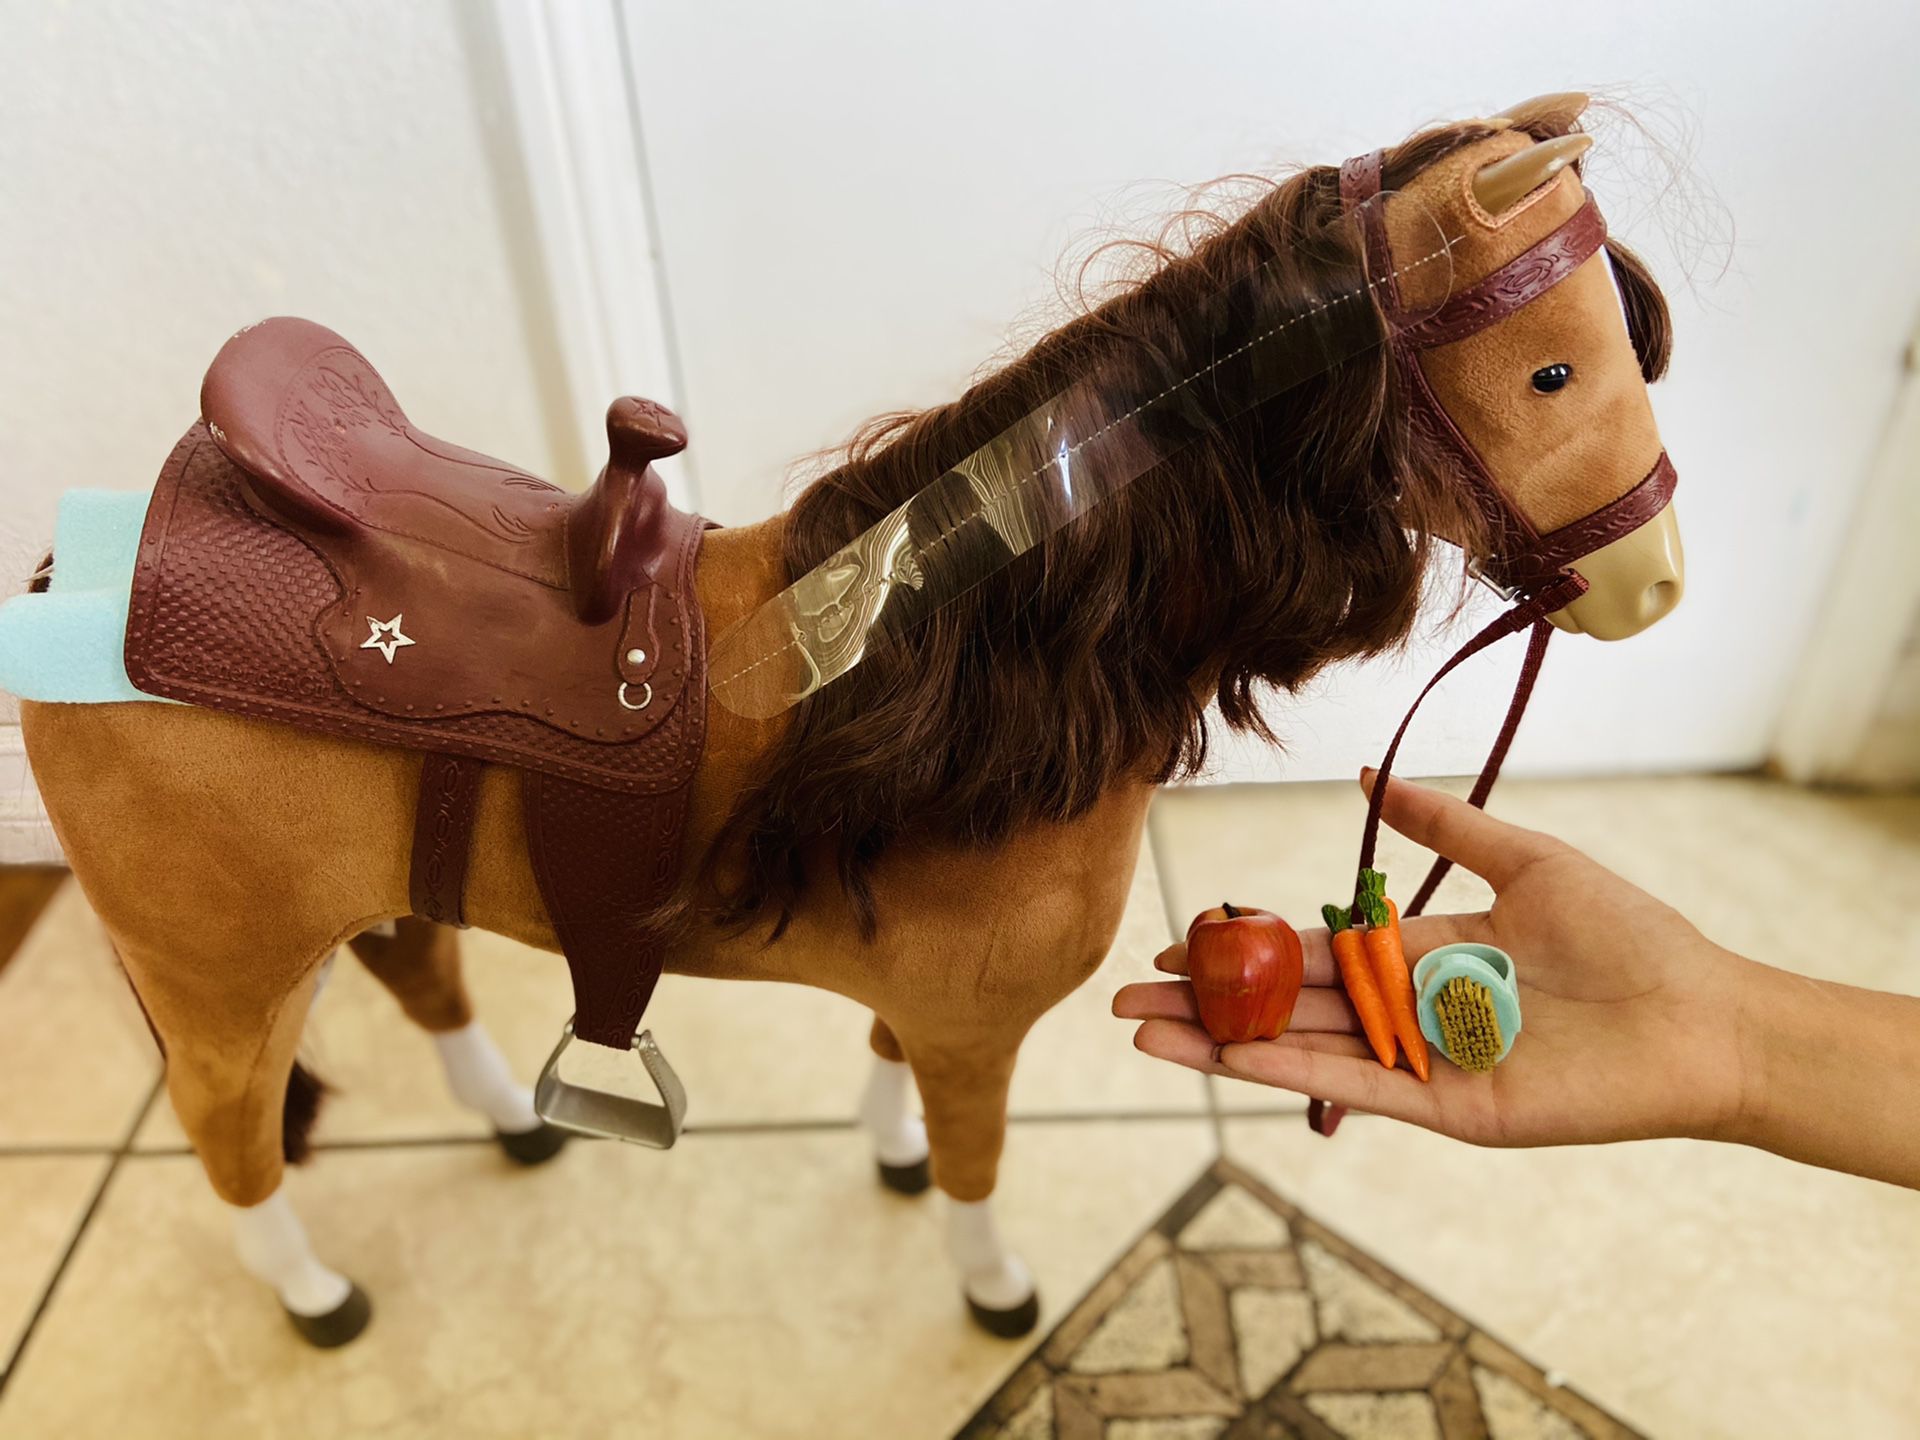 American doll horse with accessories